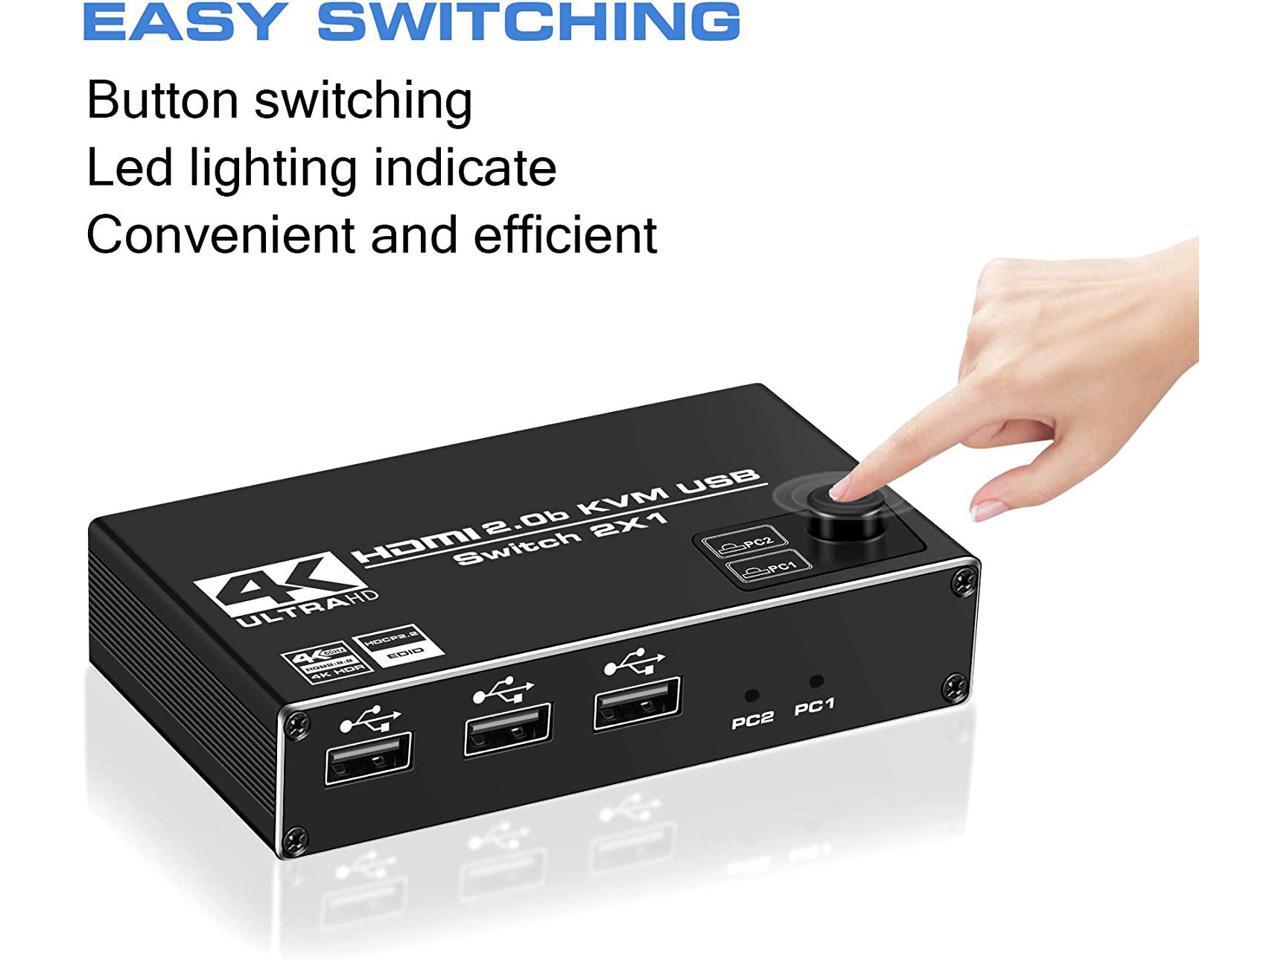 HF-HKU212: HDMI KVM Switch, 4K@60Hz USB Switch 2x1 HDMI2.0 Ports + 3X USB KVM Ports, Share 2 Computers to one Monitor, Support Wireless Keyboard and Mouse, USB Disk, Printer, USB Camera (Included 2 USB Cable) - Click Image to Close